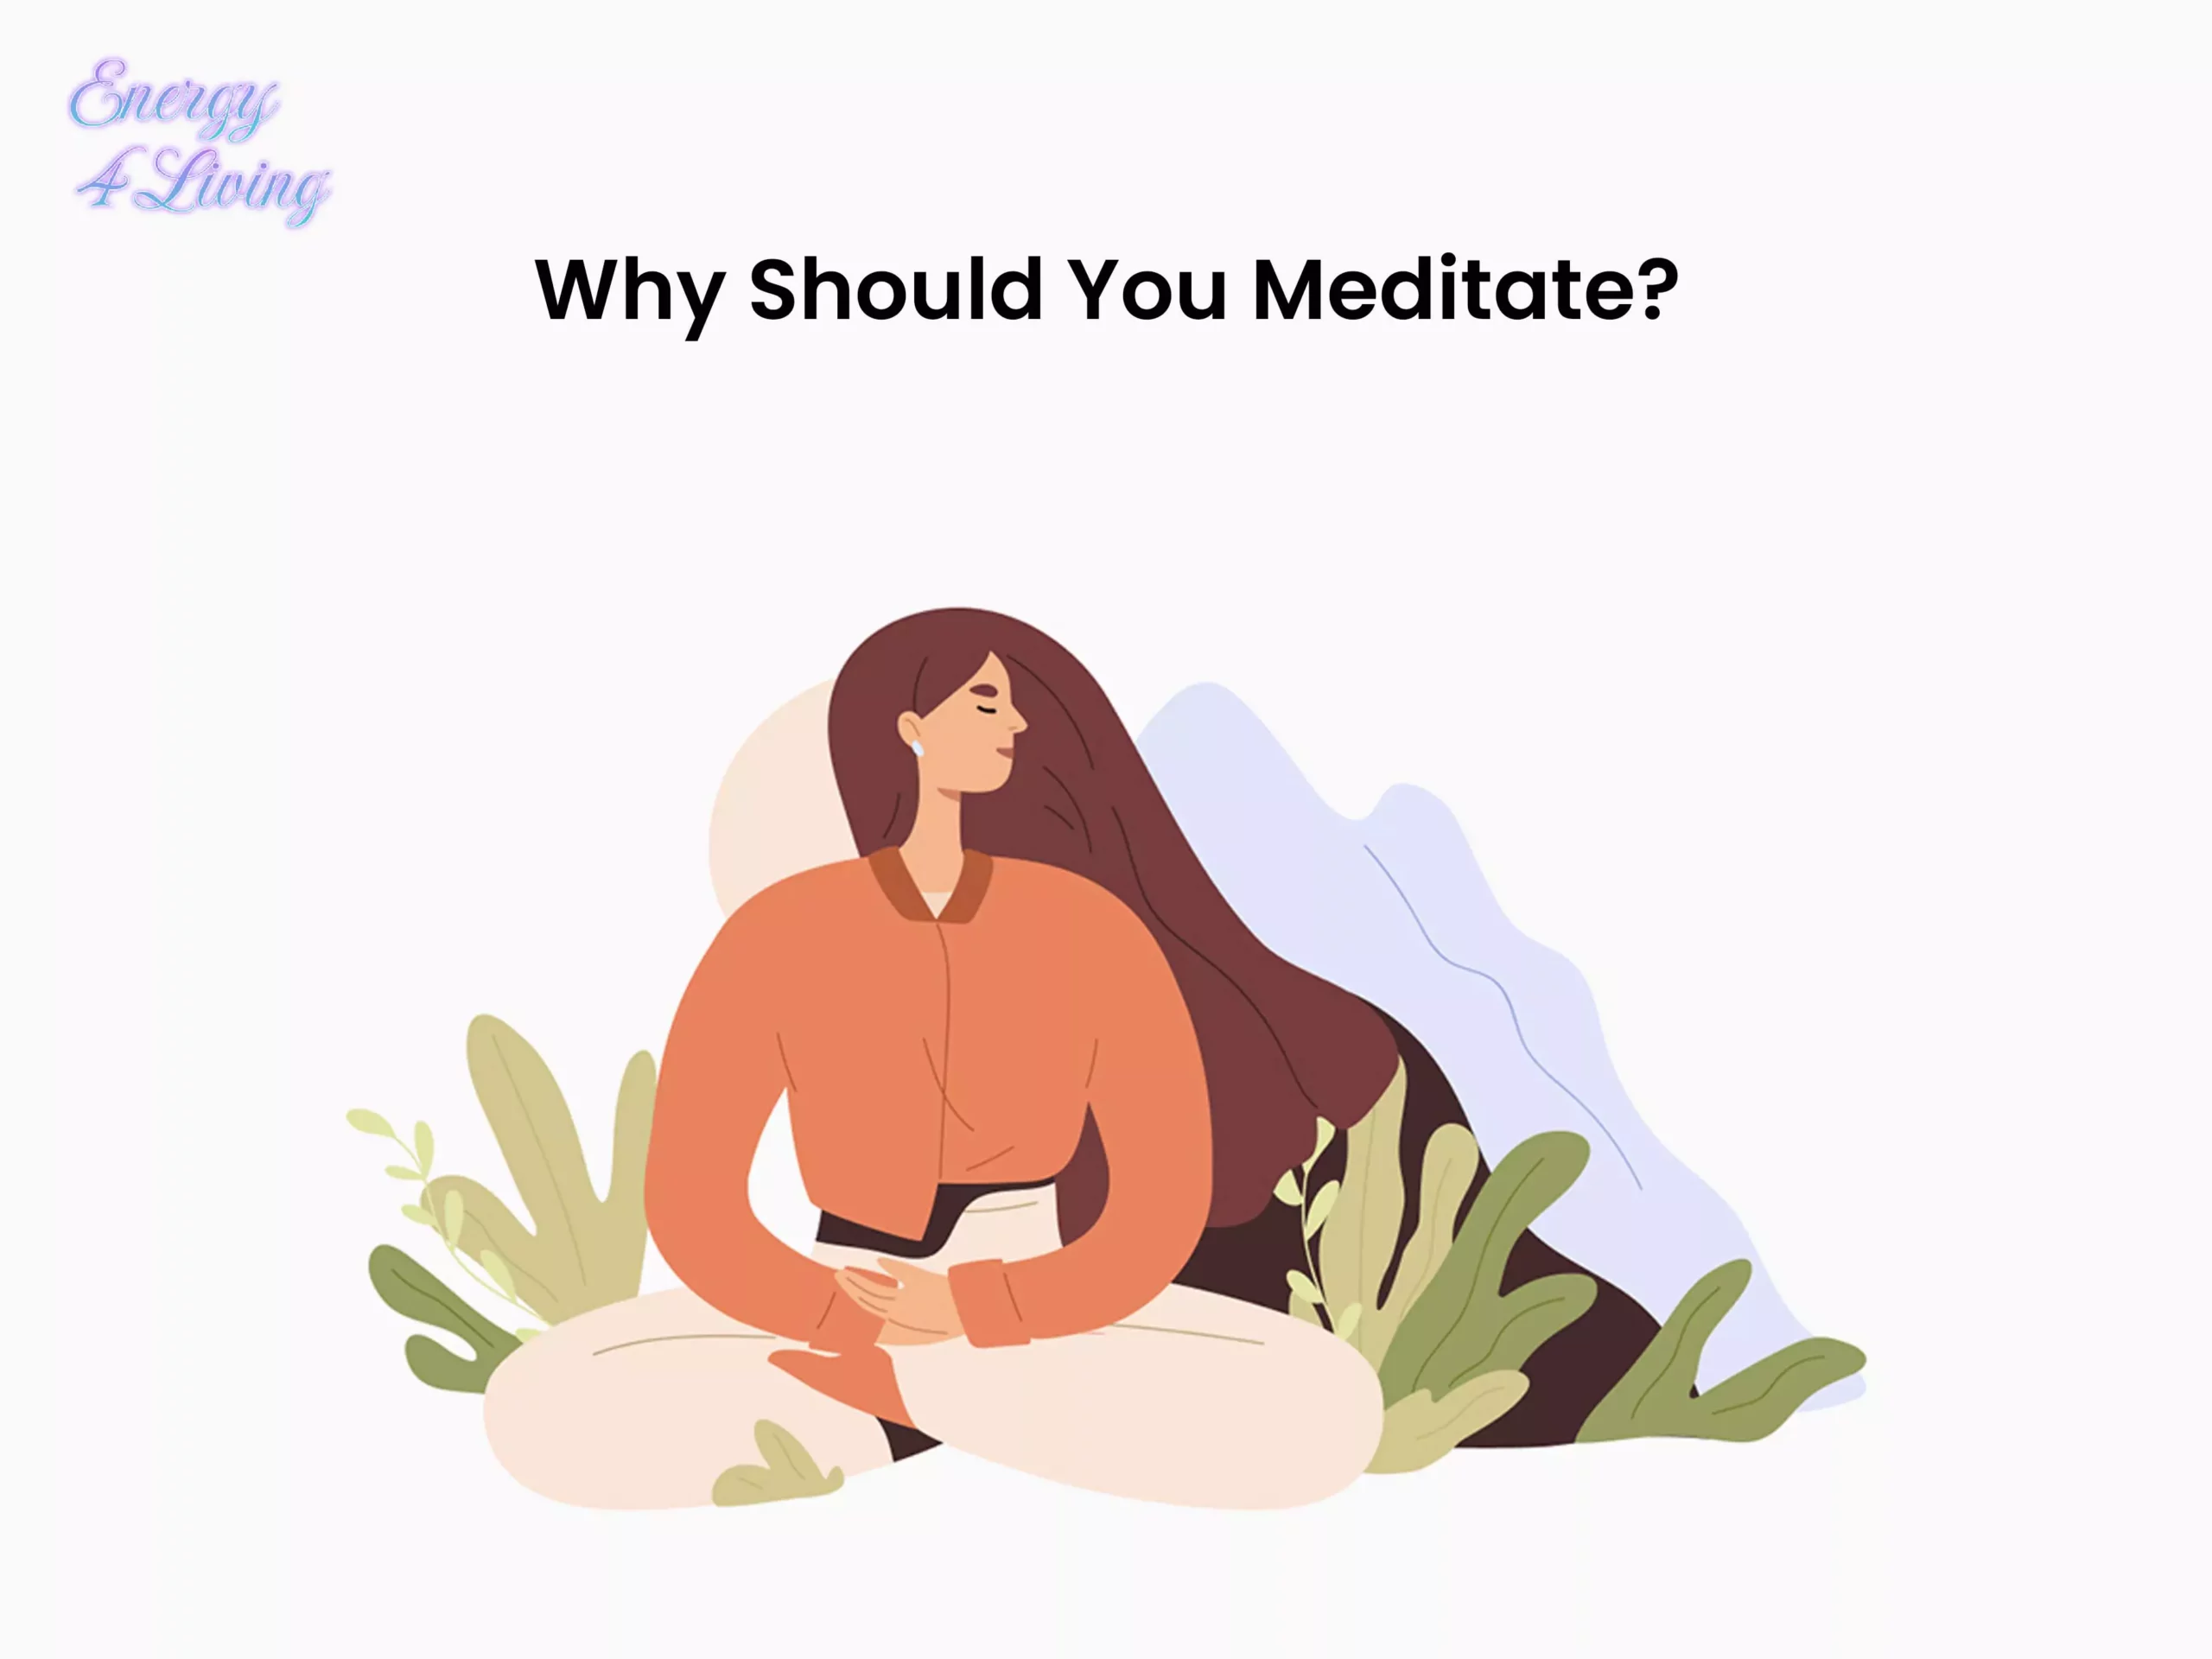 Why Should You Meditate?